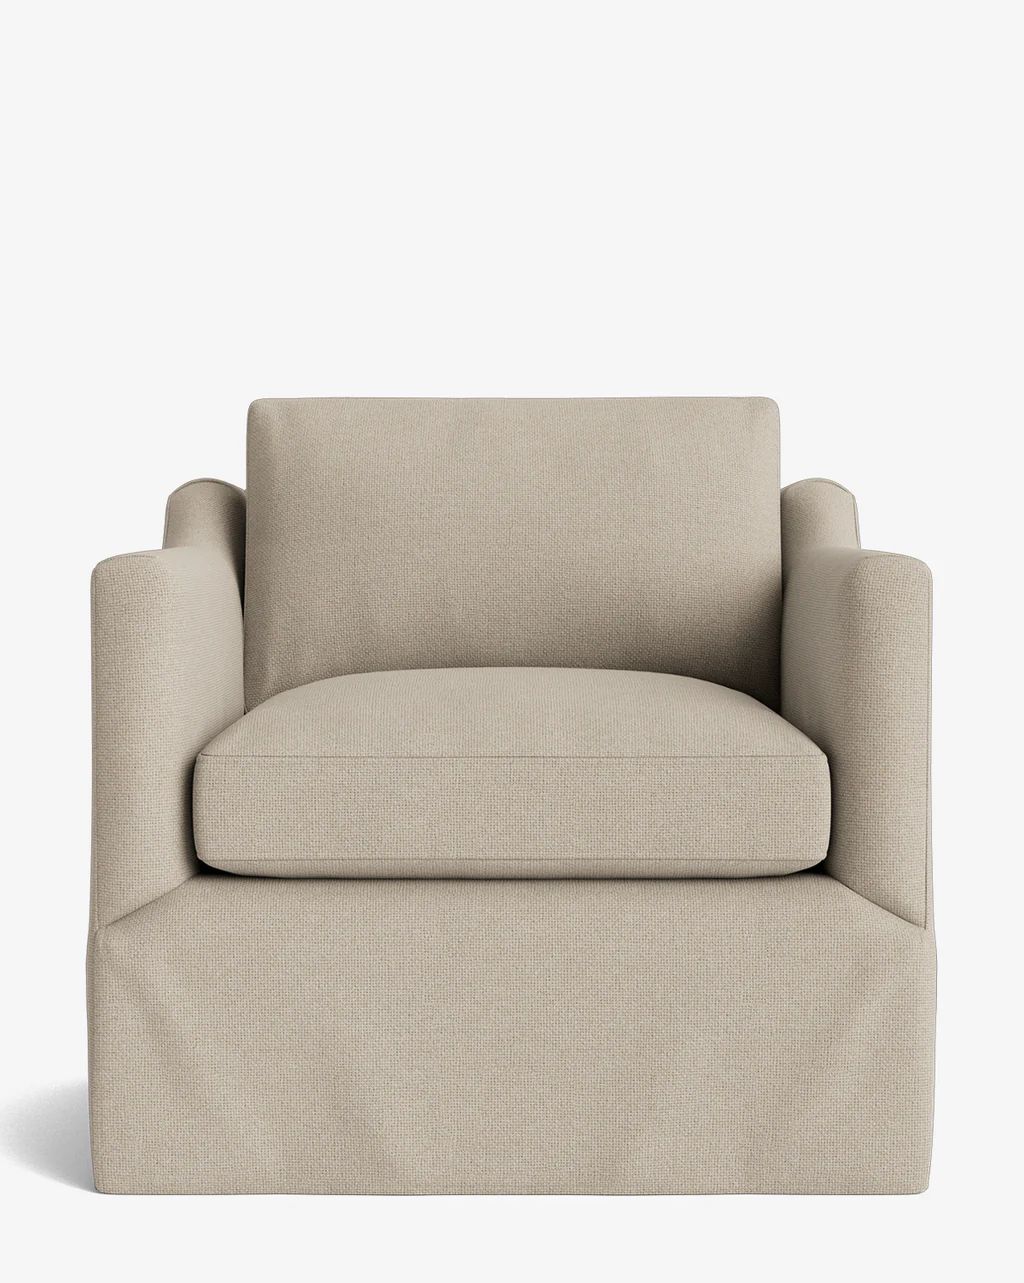 Haverford Slipcover Lounge Chair | McGee & Co.